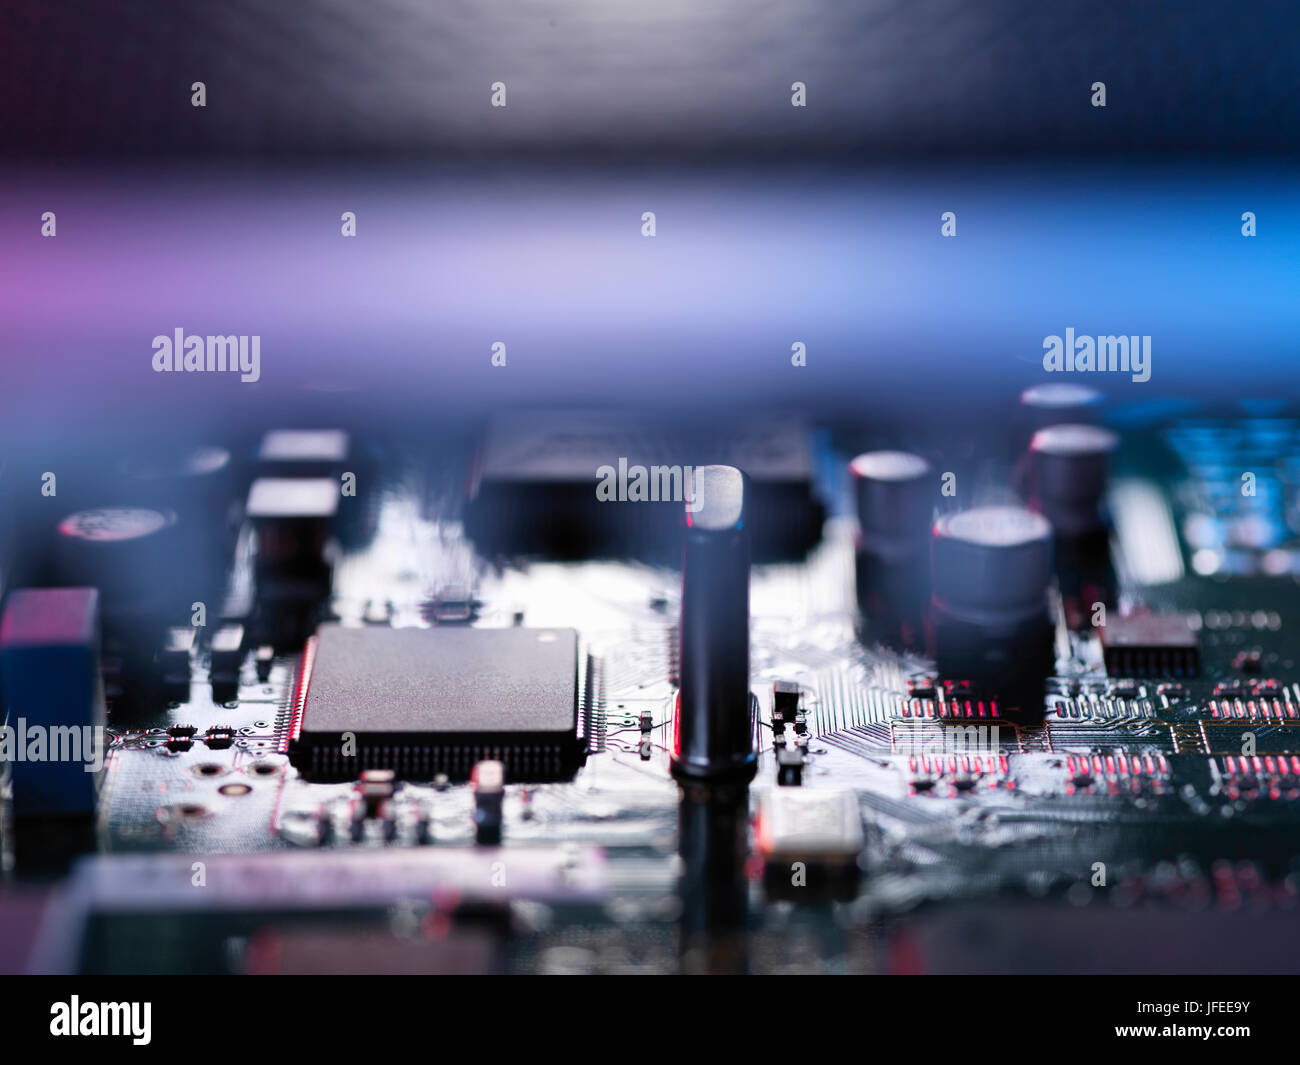 Printed circuit board from a wireless internet hub. Stock Photo